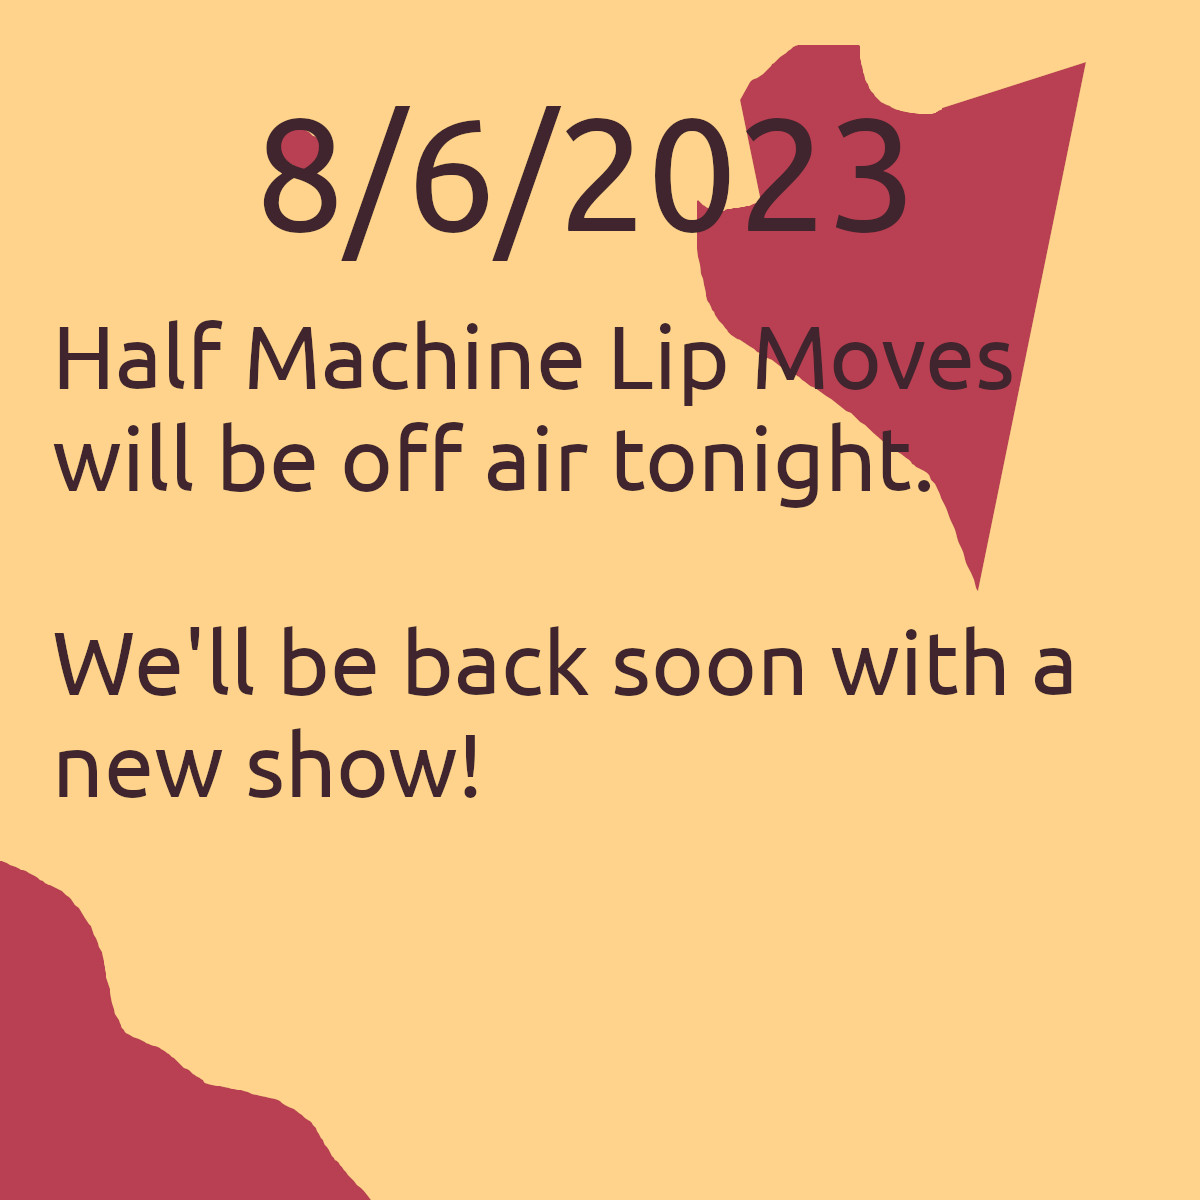 The picture says, &lsquo;8/6/2023. Half Machine Lip Moves will be off air this week. We&rsquo;ll be back with a new show soon.&rsquo;